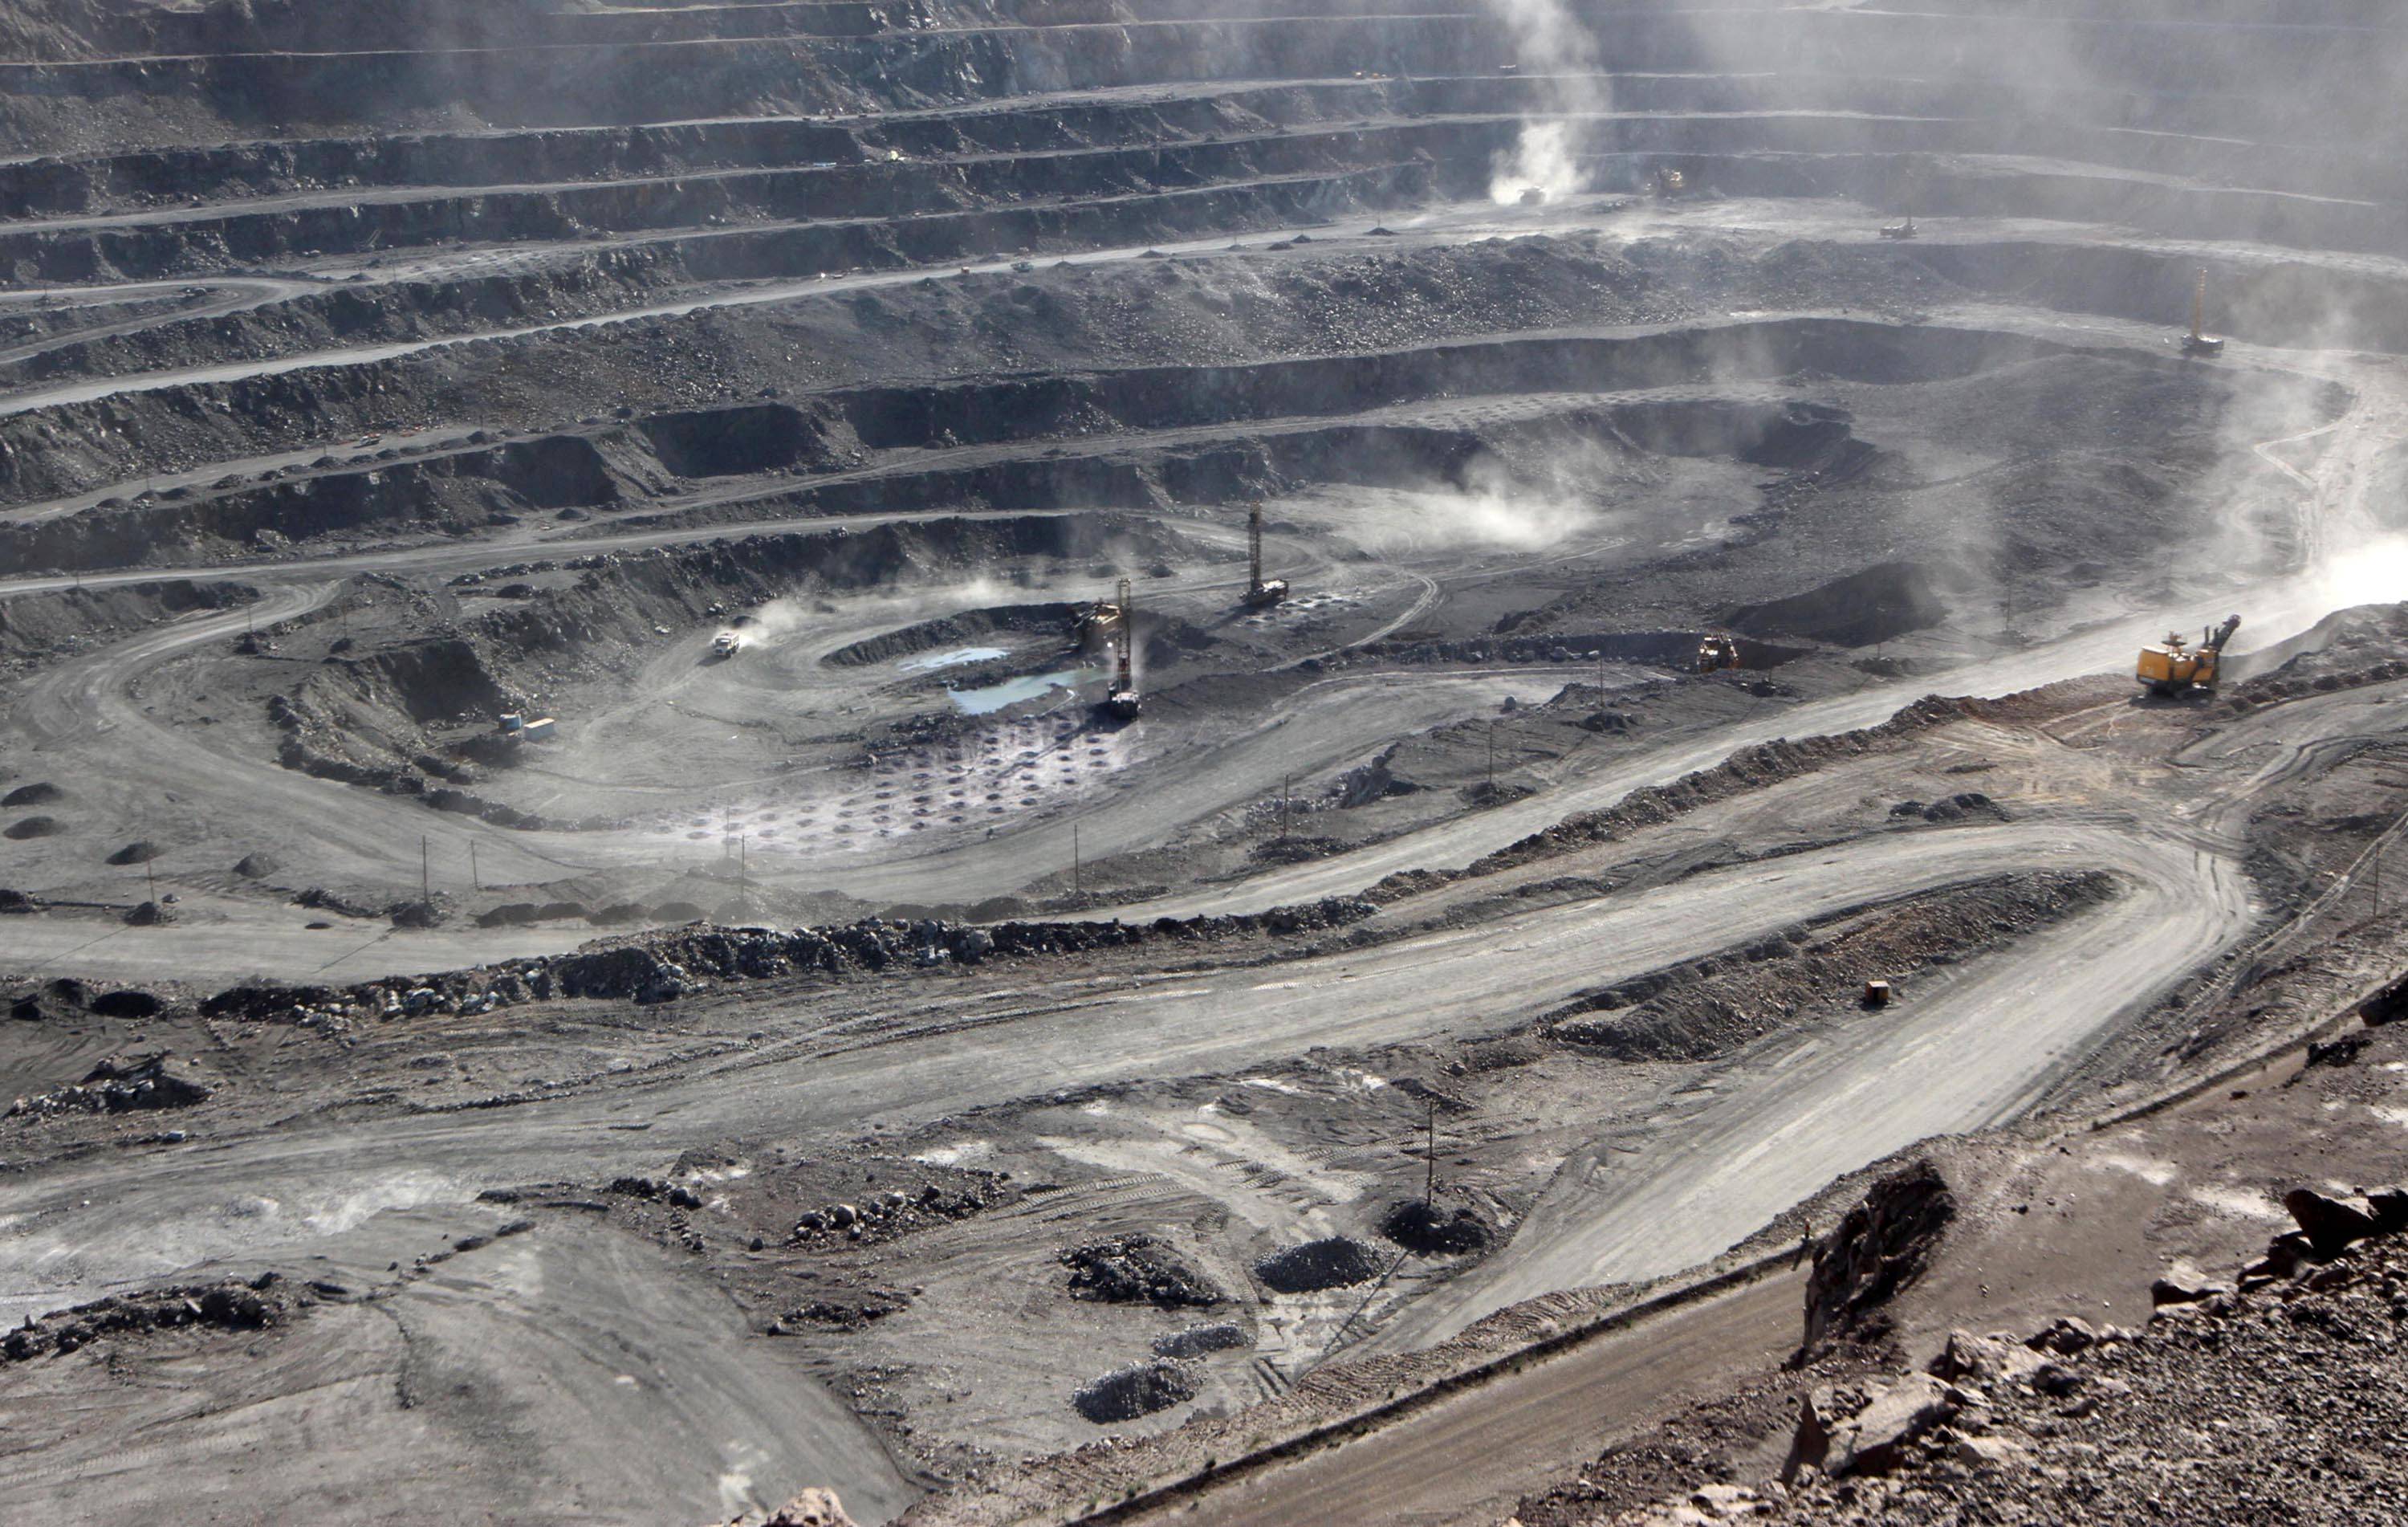 The Bayan Obo mine, which contains rare earth minerals, in Inner Mongolia, China, in July 2011. | REUTERS